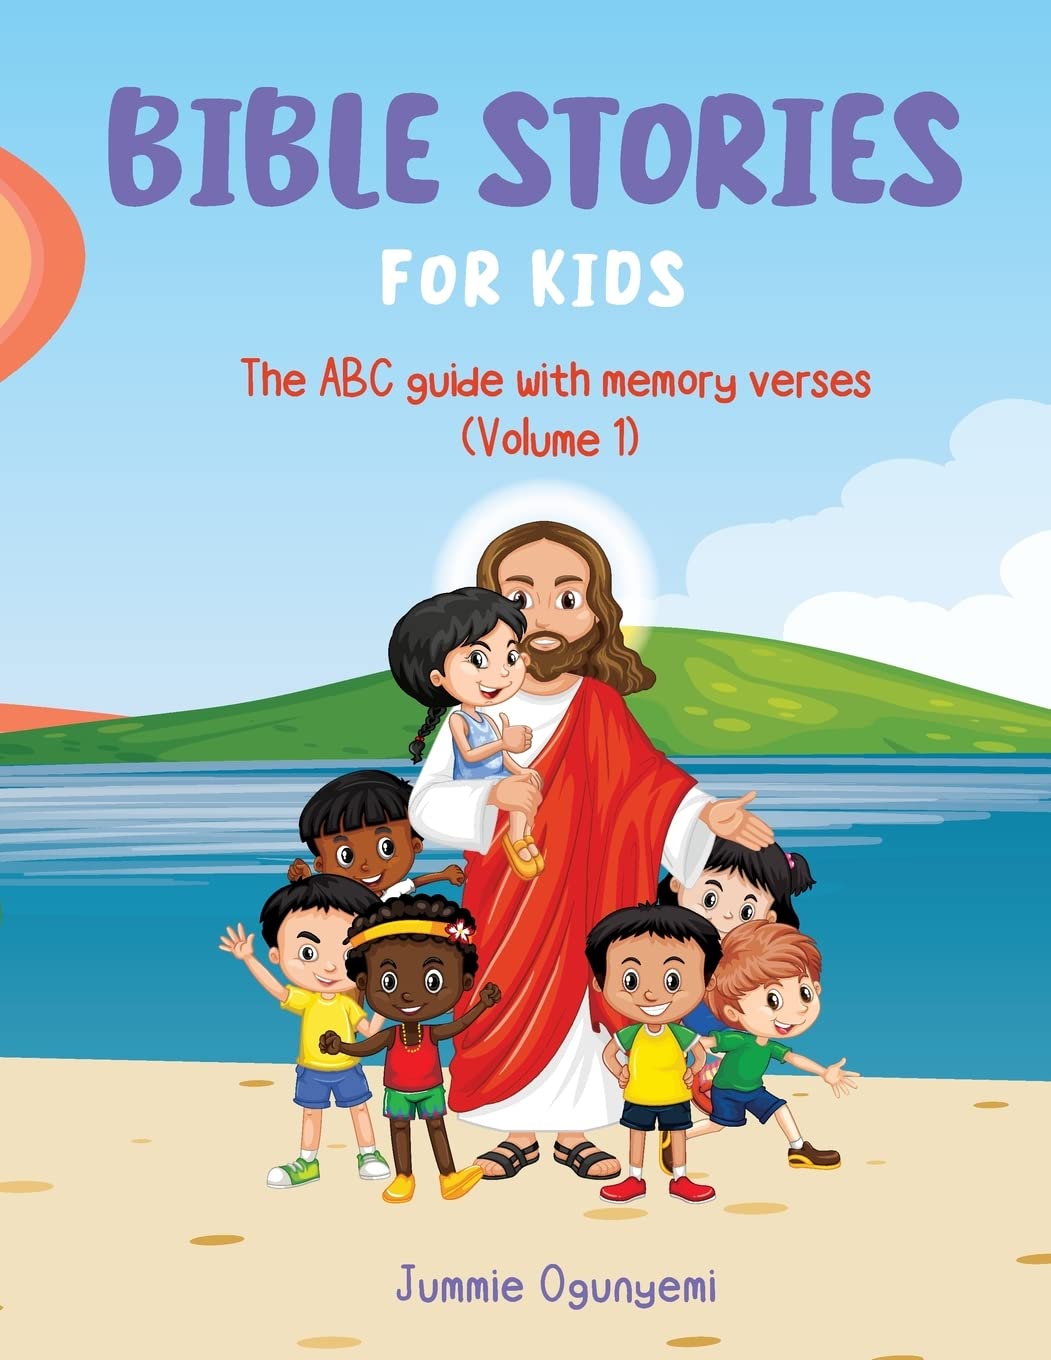 Author and Pastor Jummie Ogunyemi Releases New Book "Bible Stories for Kids: The ABC Guide with Memory Verses"